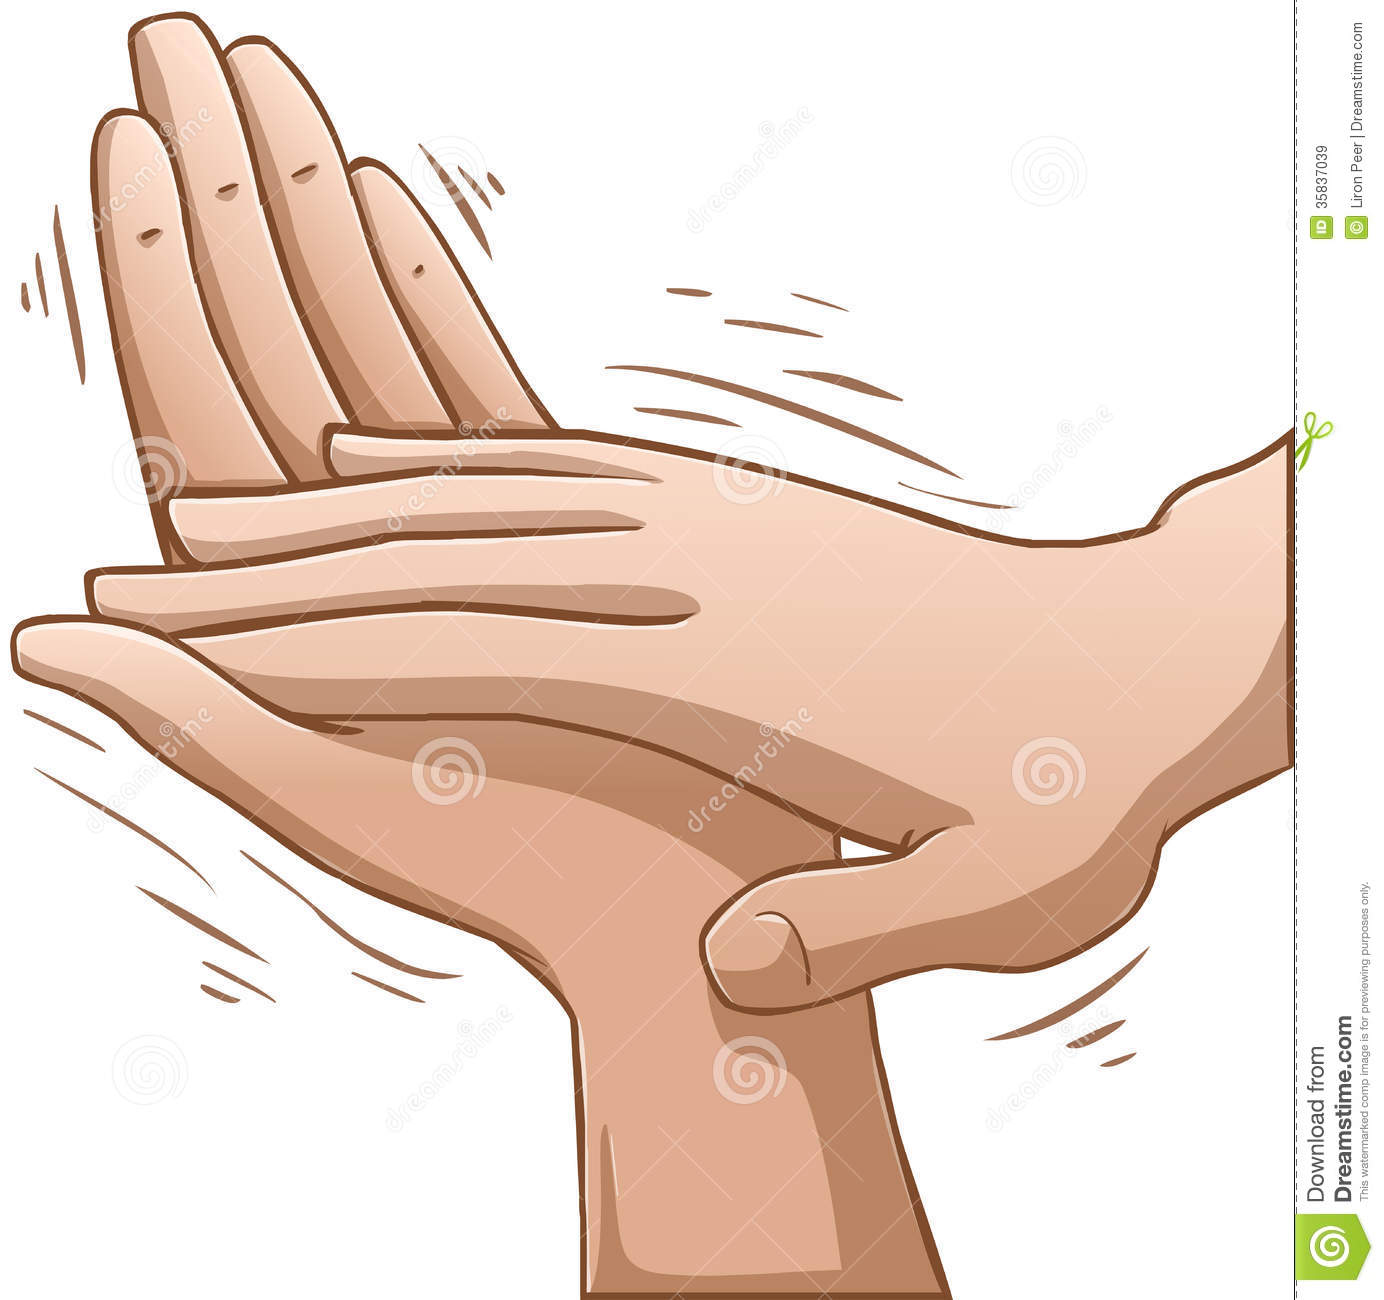 Applause Clipart Clapping Hands Royalty Free